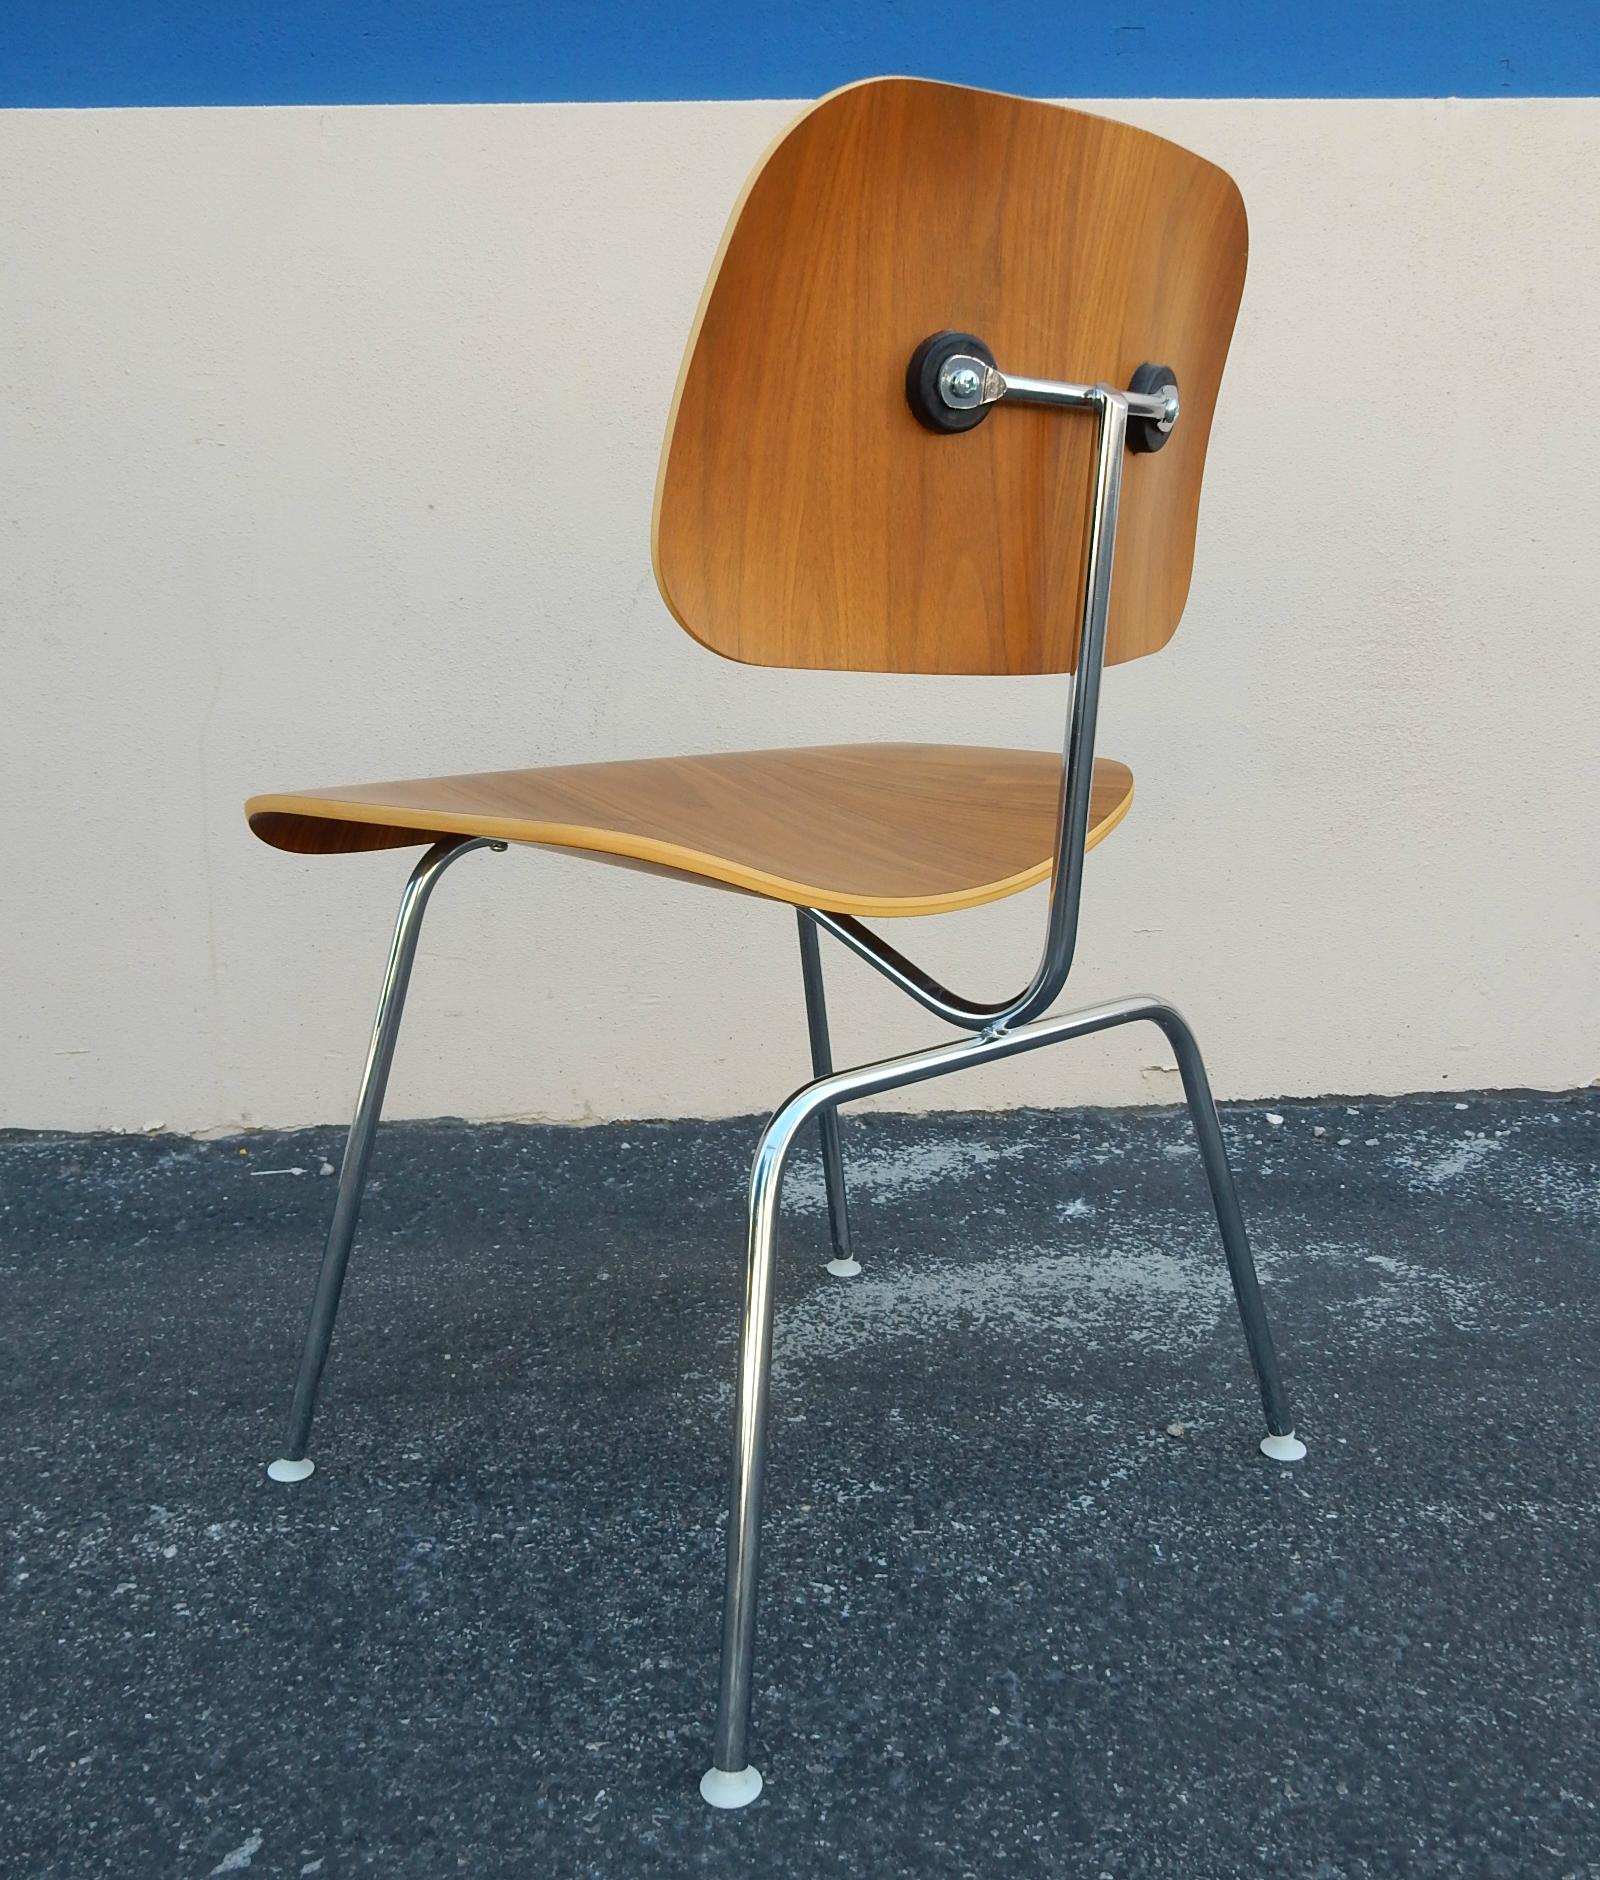 16 available at the start of listing...
Authentic Charles & Ray Eames designed for Herman Miller model DCM
dining chair in chrome and walnut.
Mfg. dated 2007.
All in un-restored, excellent, barley used condition.
Priced per chair...